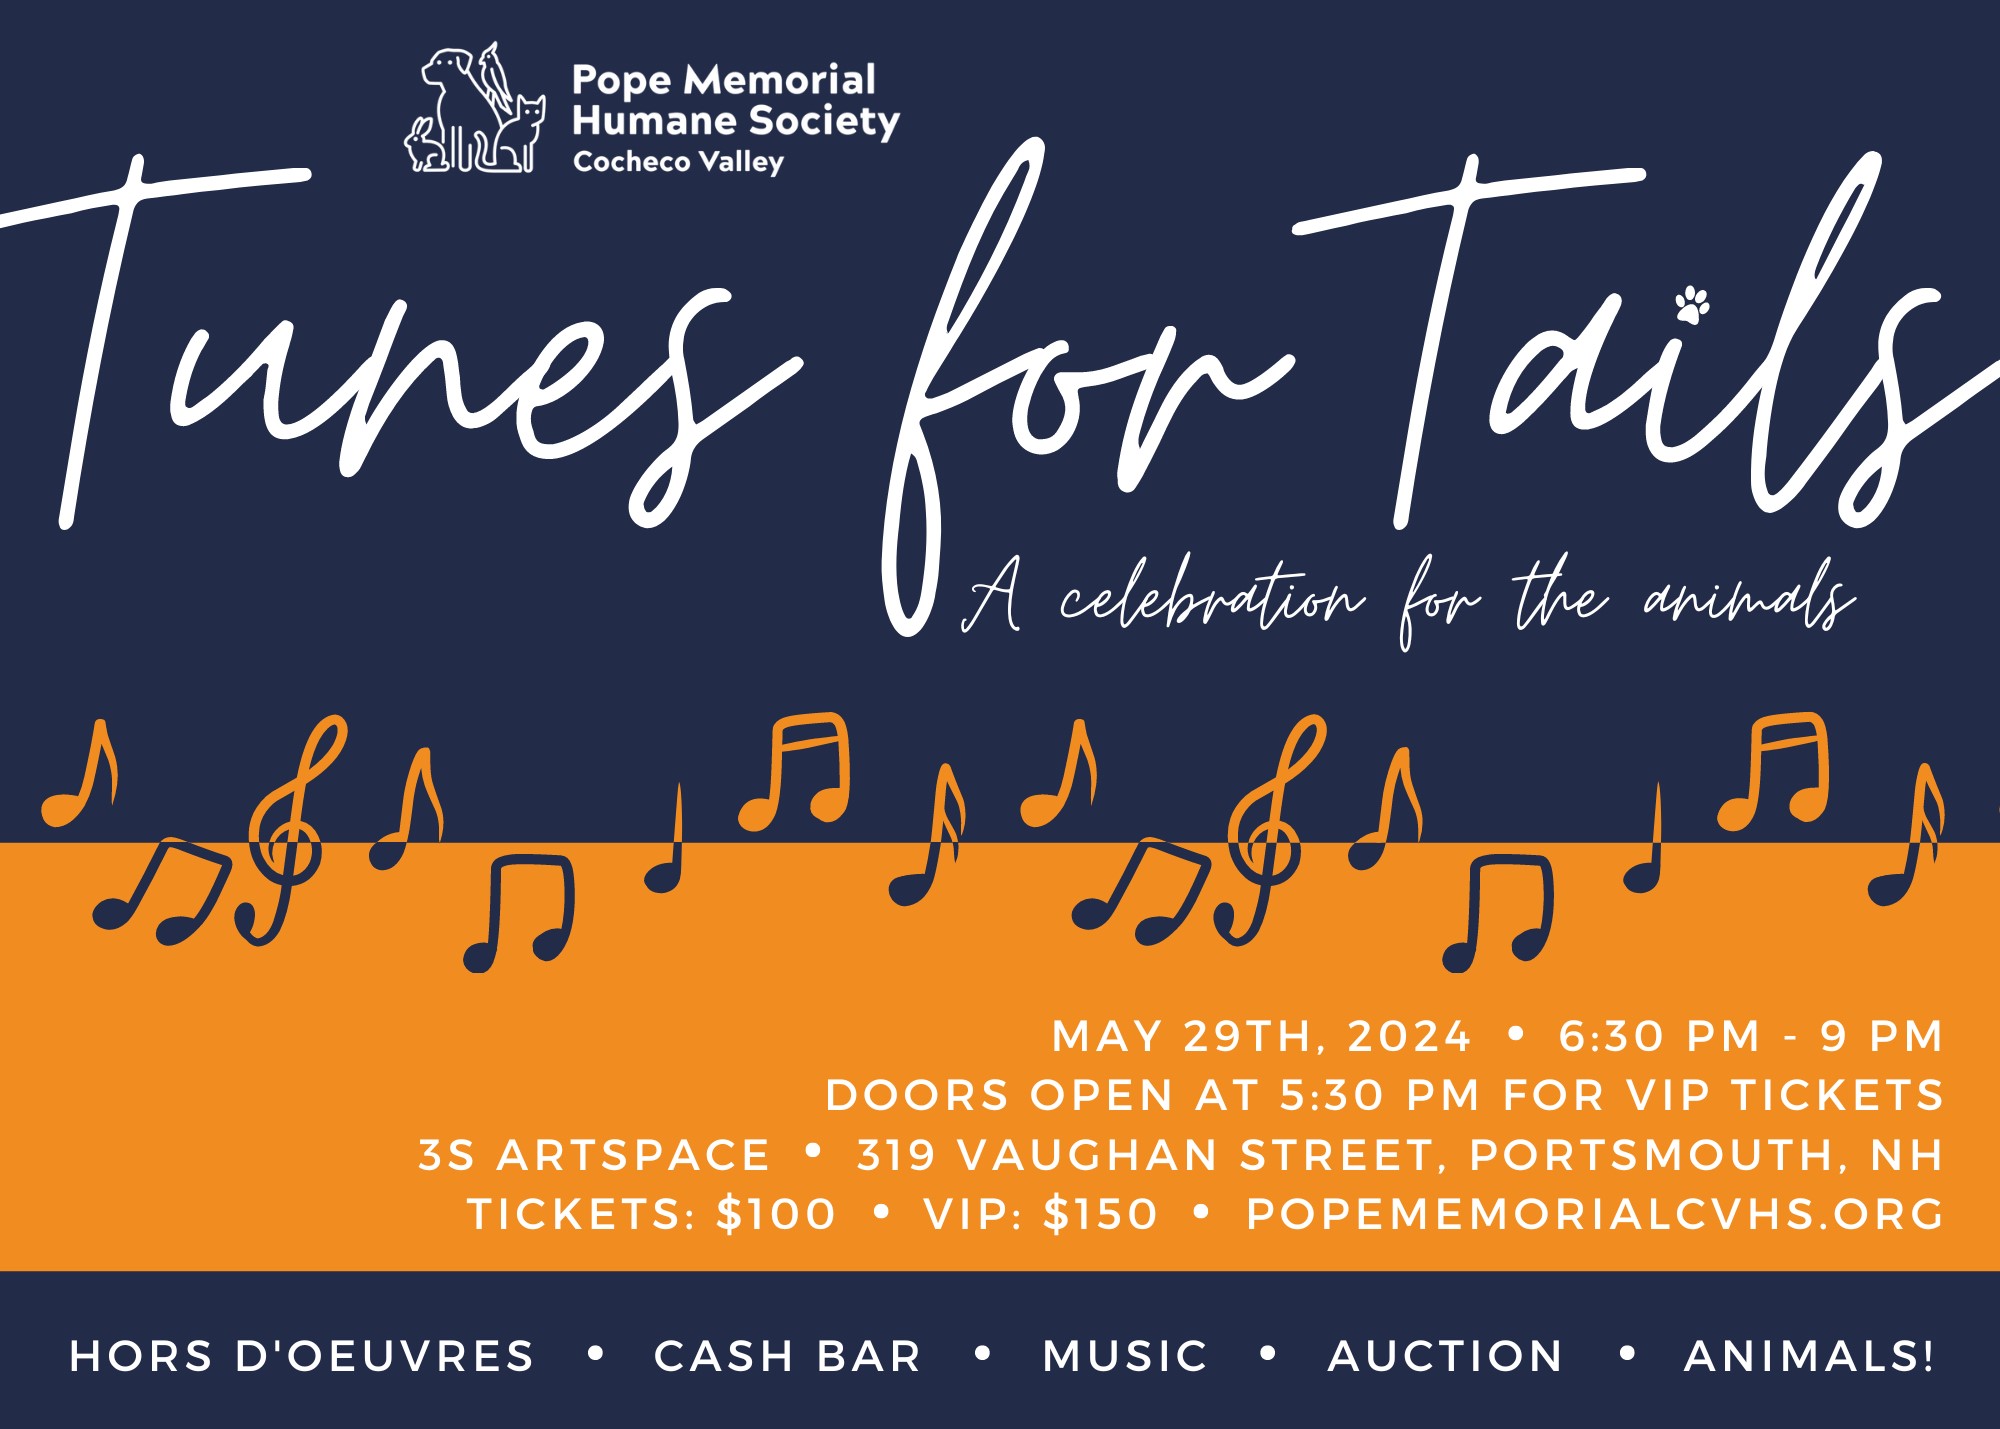 Invitation to a Tunes for Tails event for Pope Memorial Humane Society - Cocheco Valley